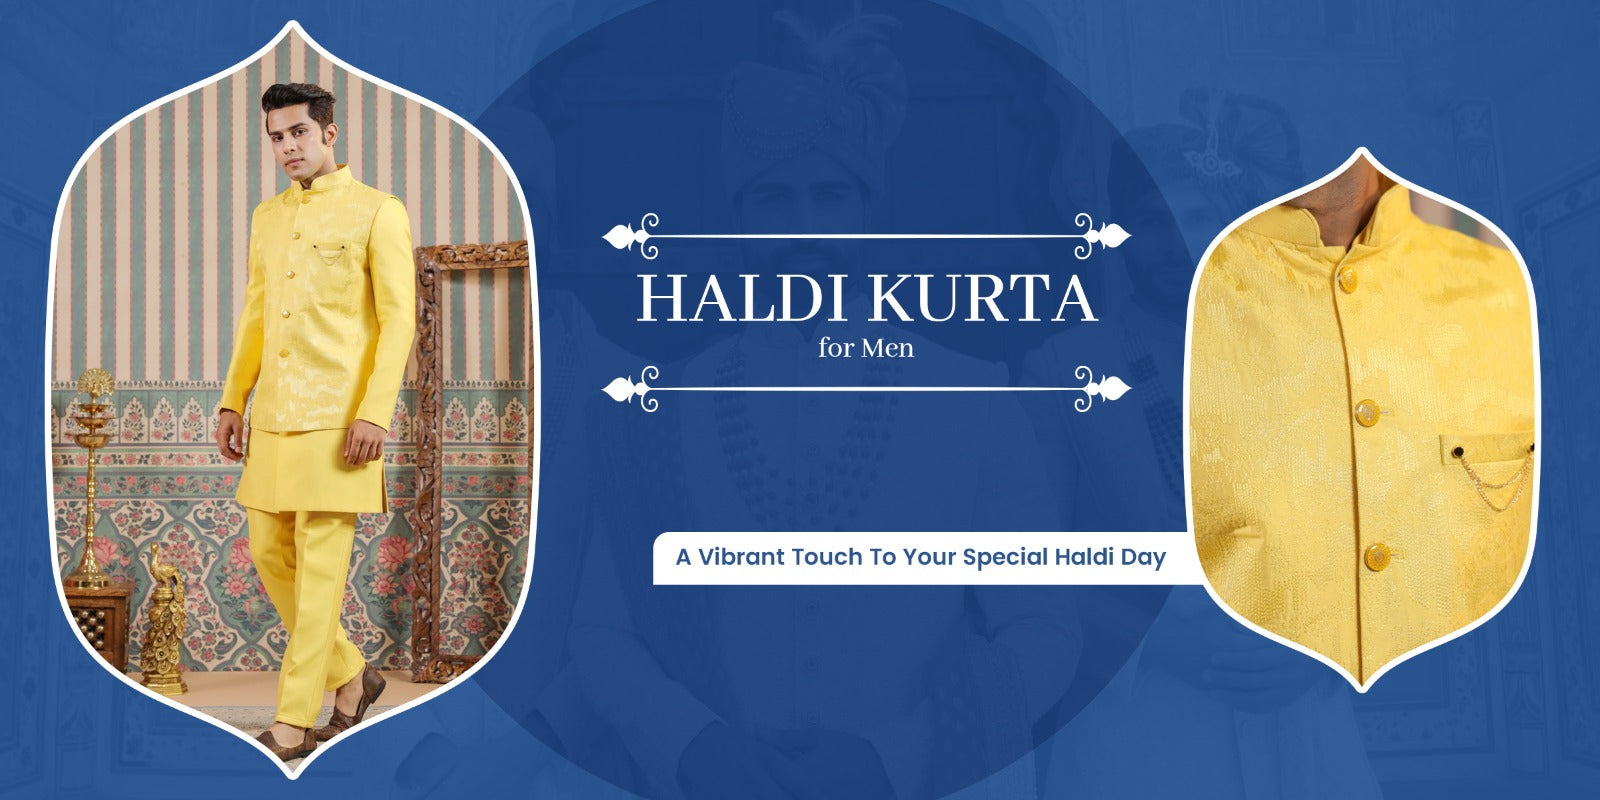 Haldi Kurta for Men: A Vibrant Touch To Your Special Haldi Day